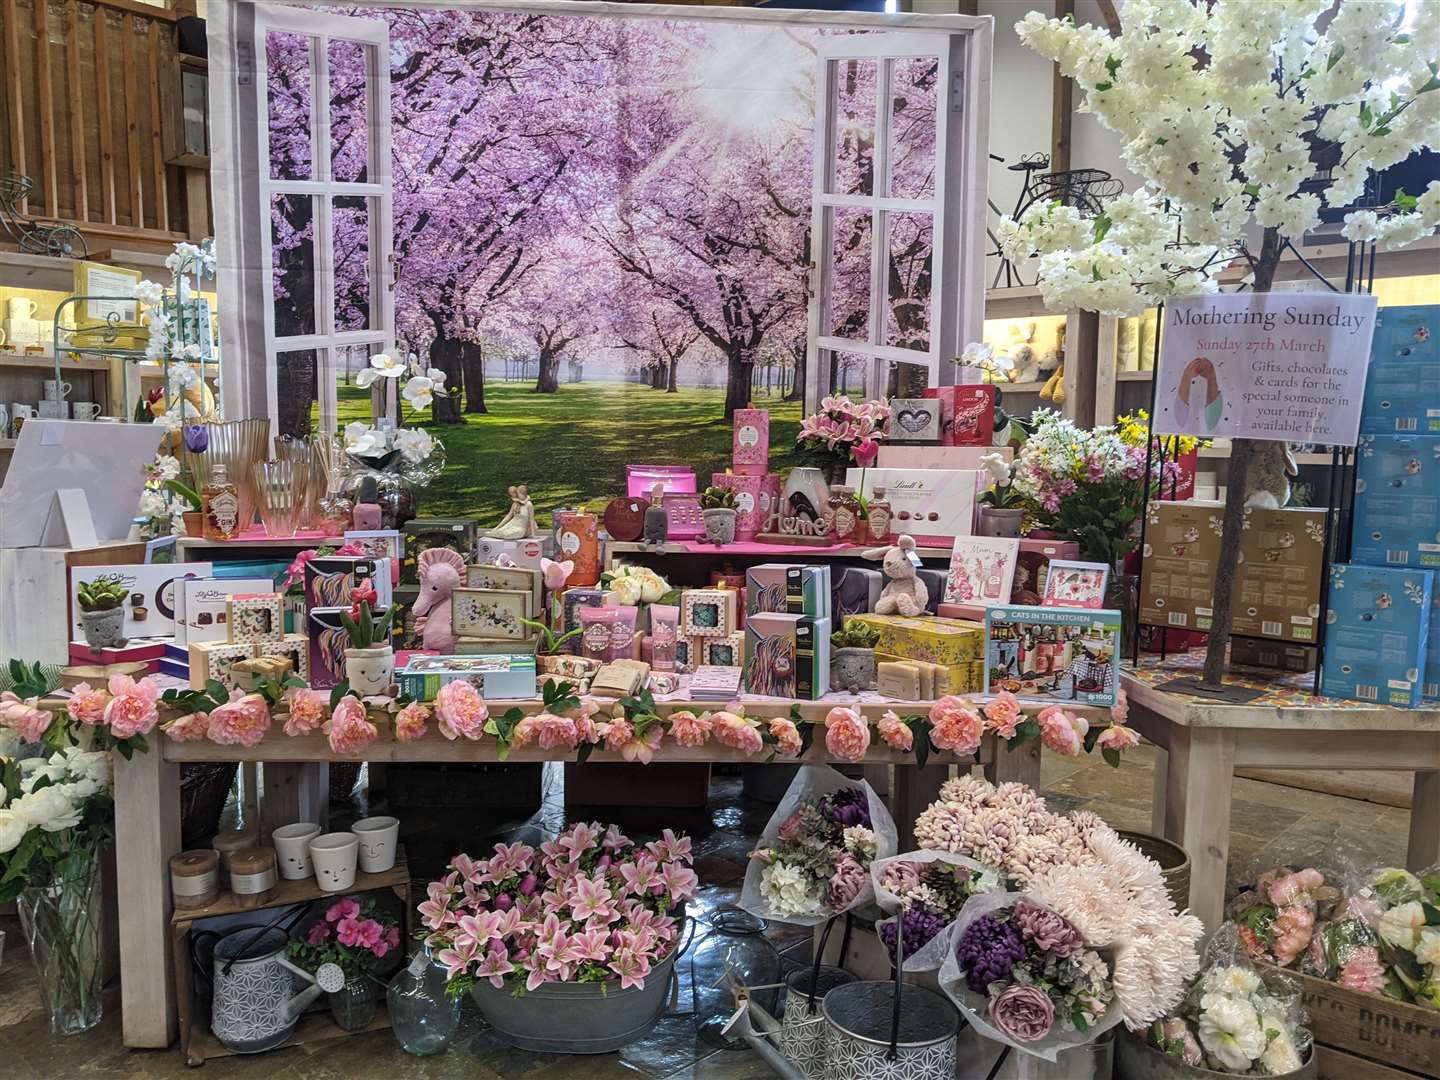 The gift shop at Penshurst Place will be filled with Mother's Day goodies. Picture: © Penshurst Place and Gardens